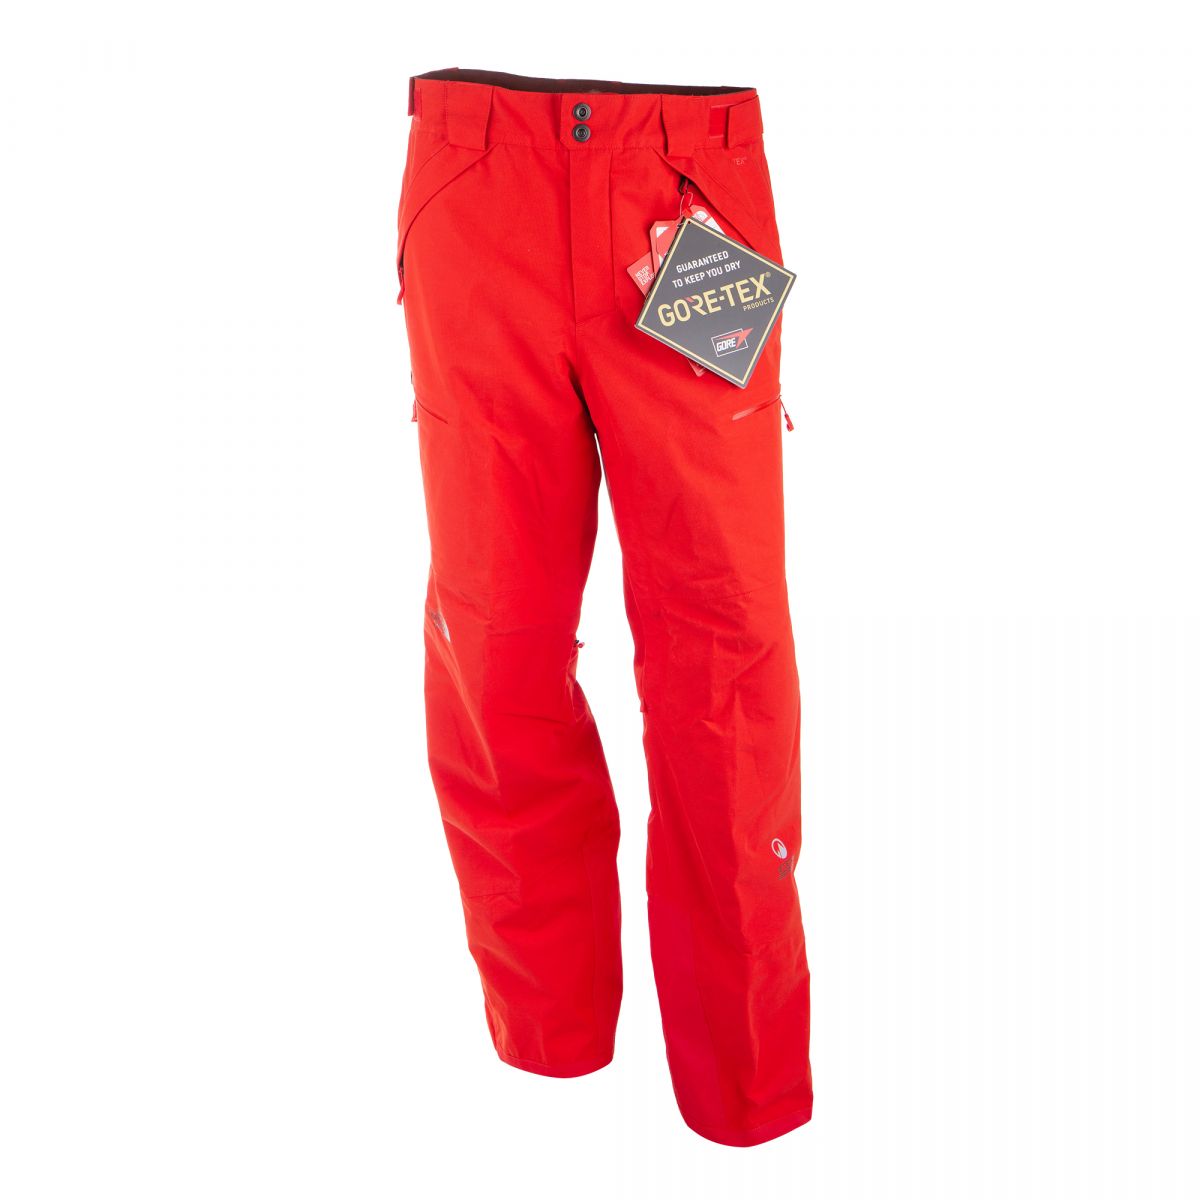 fluctuate Ruthless cure Pantalon ski NFZ Steep Series Gore-Tex Homme THE NORTH FACE à prix